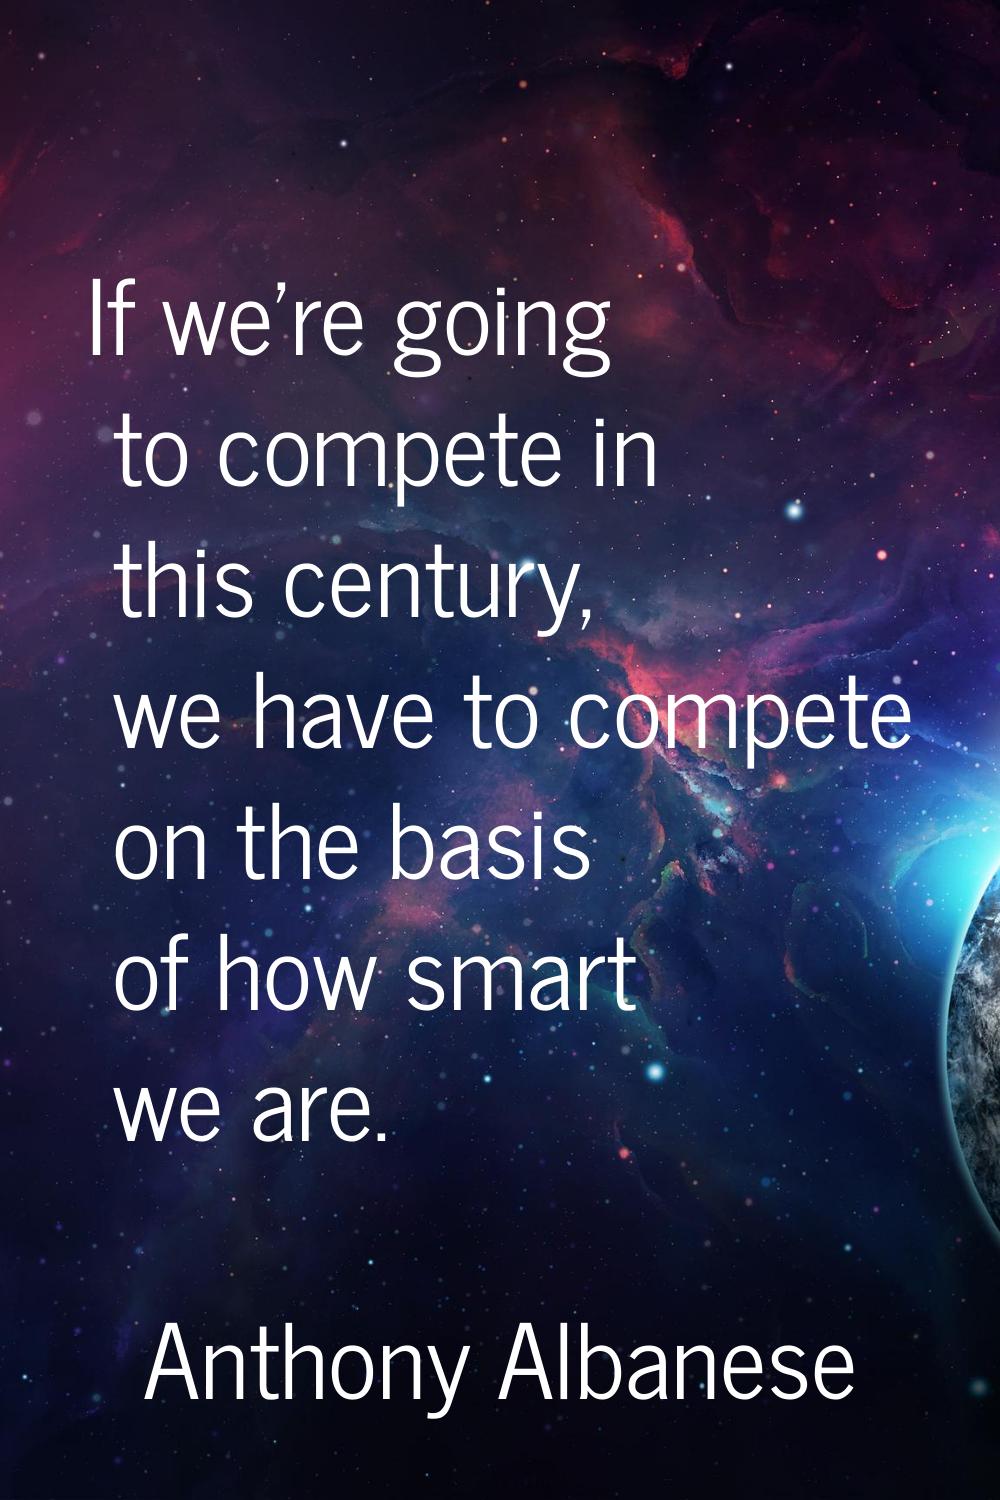 If we're going to compete in this century, we have to compete on the basis of how smart we are.